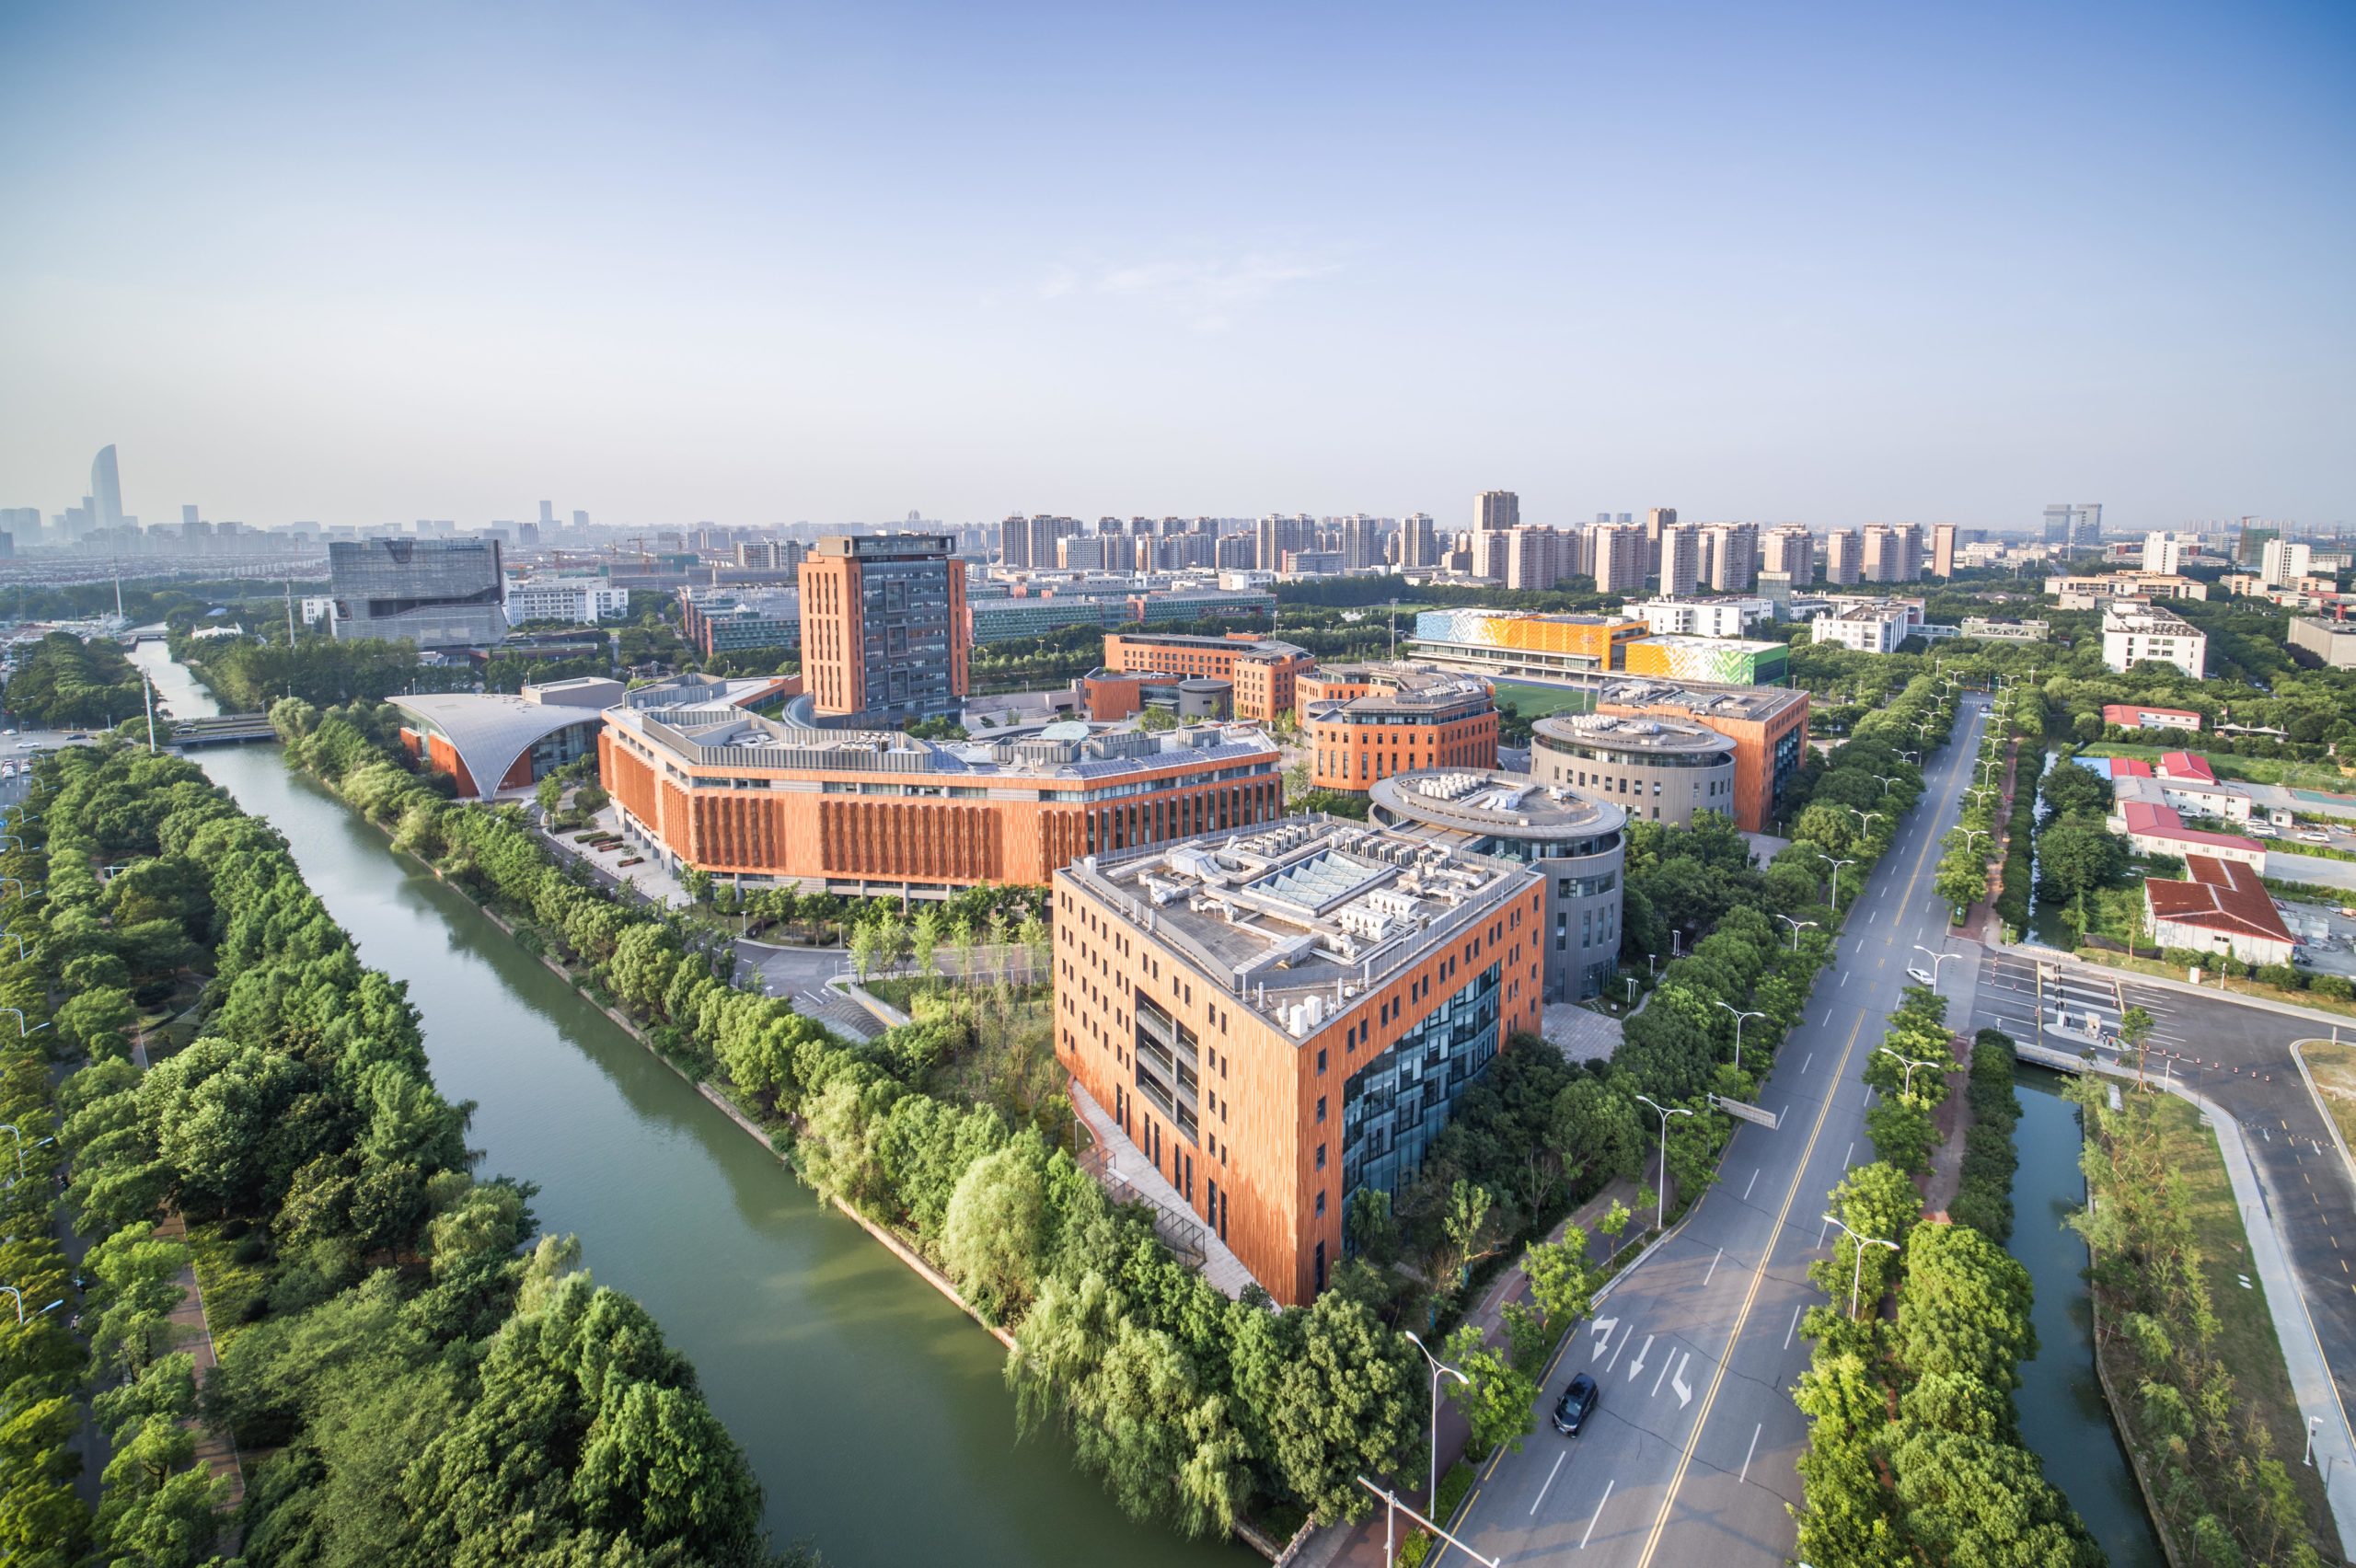 New opportunity for UoL students to study at XJTLU - Xi'an  Jiaotong-Liverpool University